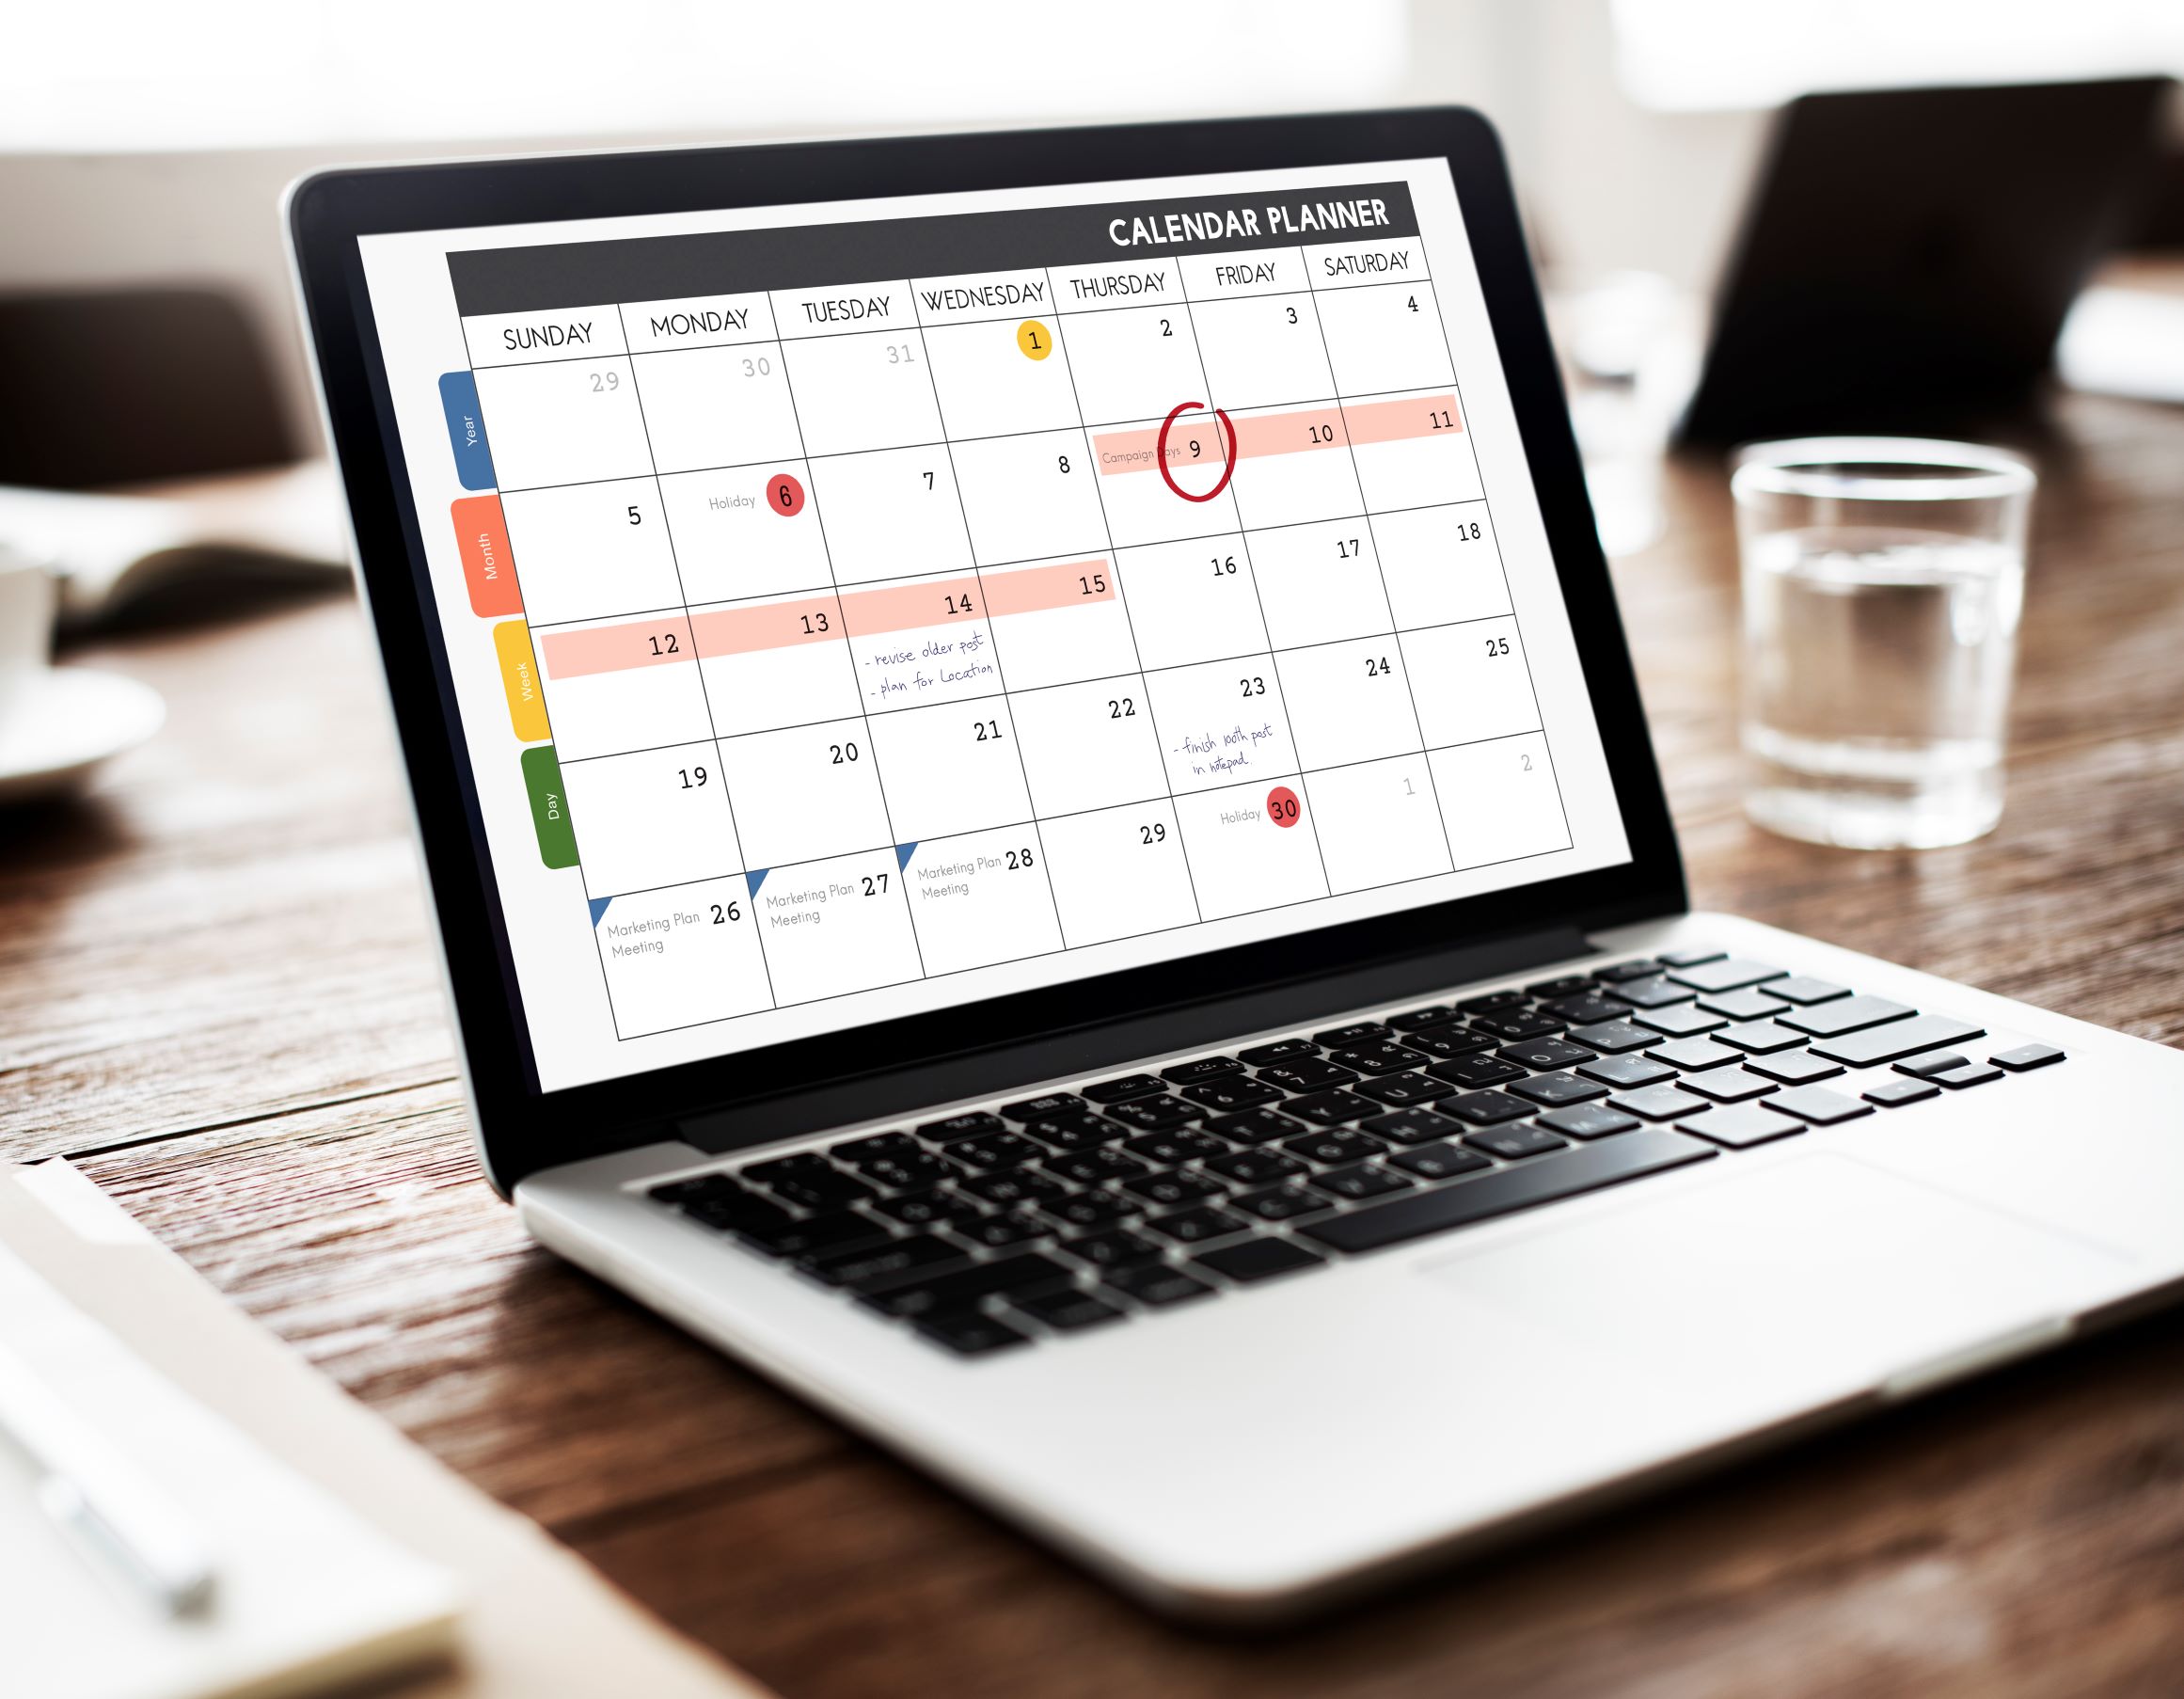 Open laptop sitting on a desk. On the screen is a calendar with entries. The date of the 9th is circled in red.